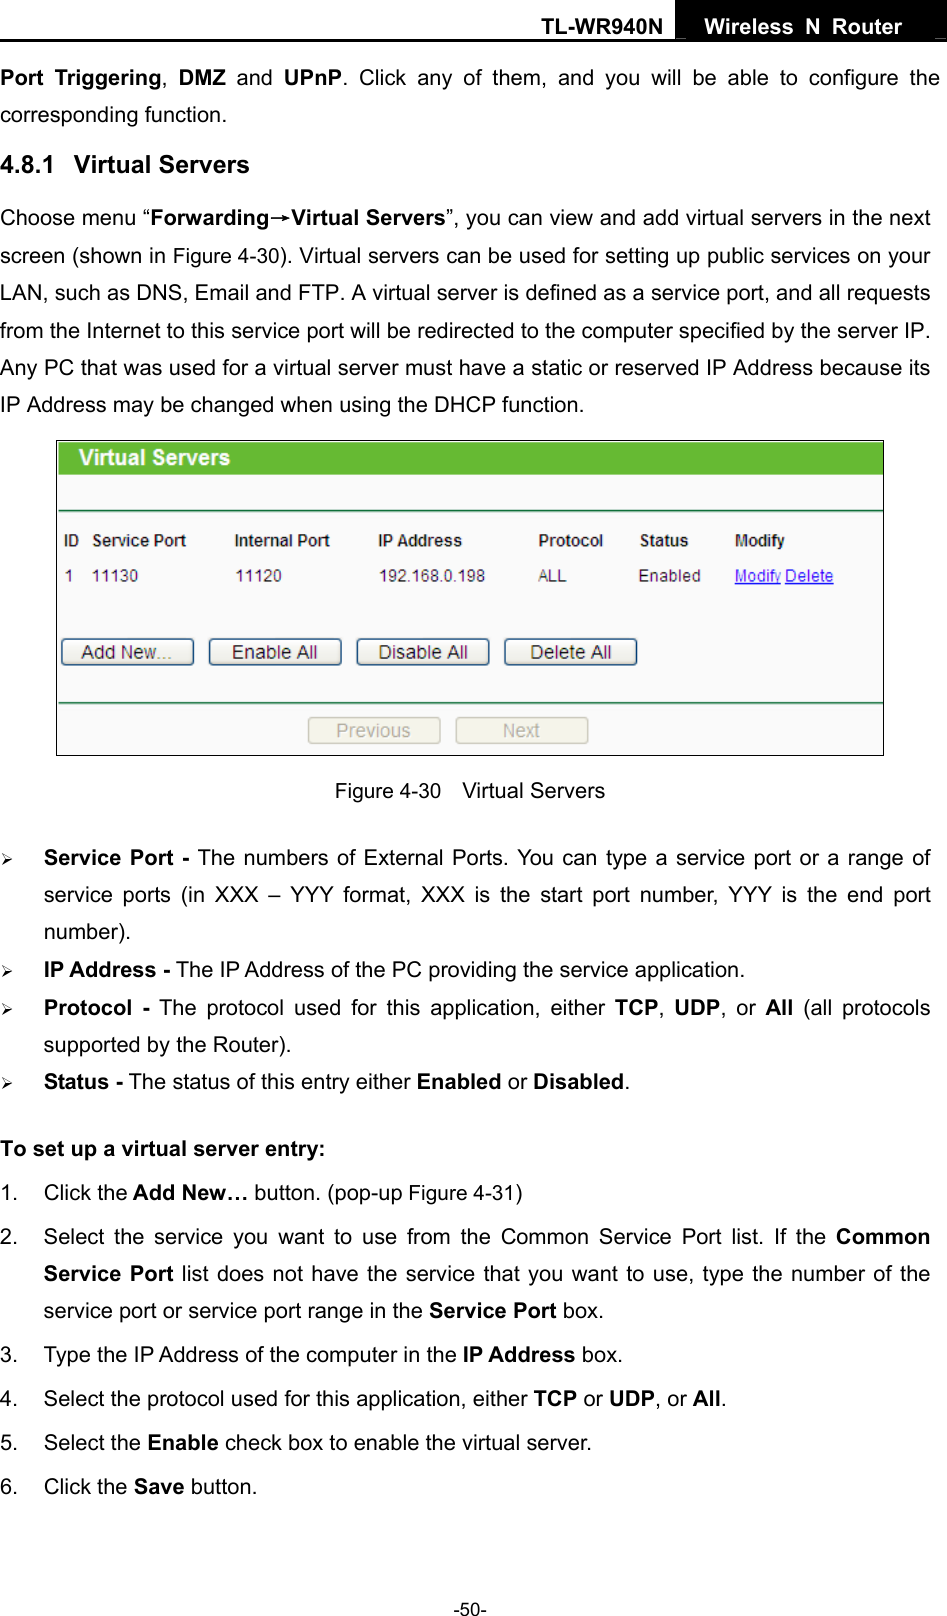 TL-WR940N  Wireless N Router   Port Triggering,  DMZ and UPnP. Click any of them, and you will be able to configure the corresponding function. 4.8.1  Virtual Servers Choose menu “Forwarding→Virtual Servers”, you can view and add virtual servers in the next screen (shown in Figure 4-30). Virtual servers can be used for setting up public services on your LAN, such as DNS, Email and FTP. A virtual server is defined as a service port, and all requests from the Internet to this service port will be redirected to the computer specified by the server IP. Any PC that was used for a virtual server must have a static or reserved IP Address because its IP Address may be changed when using the DHCP function.    Figure 4-30    Virtual Servers ¾ Service Port - The numbers of External Ports. You can type a service port or a range of service ports (in XXX – YYY format, XXX is the start port number, YYY is the end port number).  ¾ IP Address - The IP Address of the PC providing the service application. ¾ Protocol - The protocol used for this application, either TCP,  UDP, or All  (all protocols supported by the Router). ¾ Status - The status of this entry either Enabled or Disabled. To set up a virtual server entry:   1. Click the Add New… button. (pop-up Figure 4-31) 2.  Select the service you want to use from the Common Service Port list. If the Common Service Port list does not have the service that you want to use, type the number of the service port or service port range in the Service Port box. 3.  Type the IP Address of the computer in the IP Address box.  4.  Select the protocol used for this application, either TCP or UDP, or All. 5. Select the Enable check box to enable the virtual server. 6. Click the Save button.   -50- 